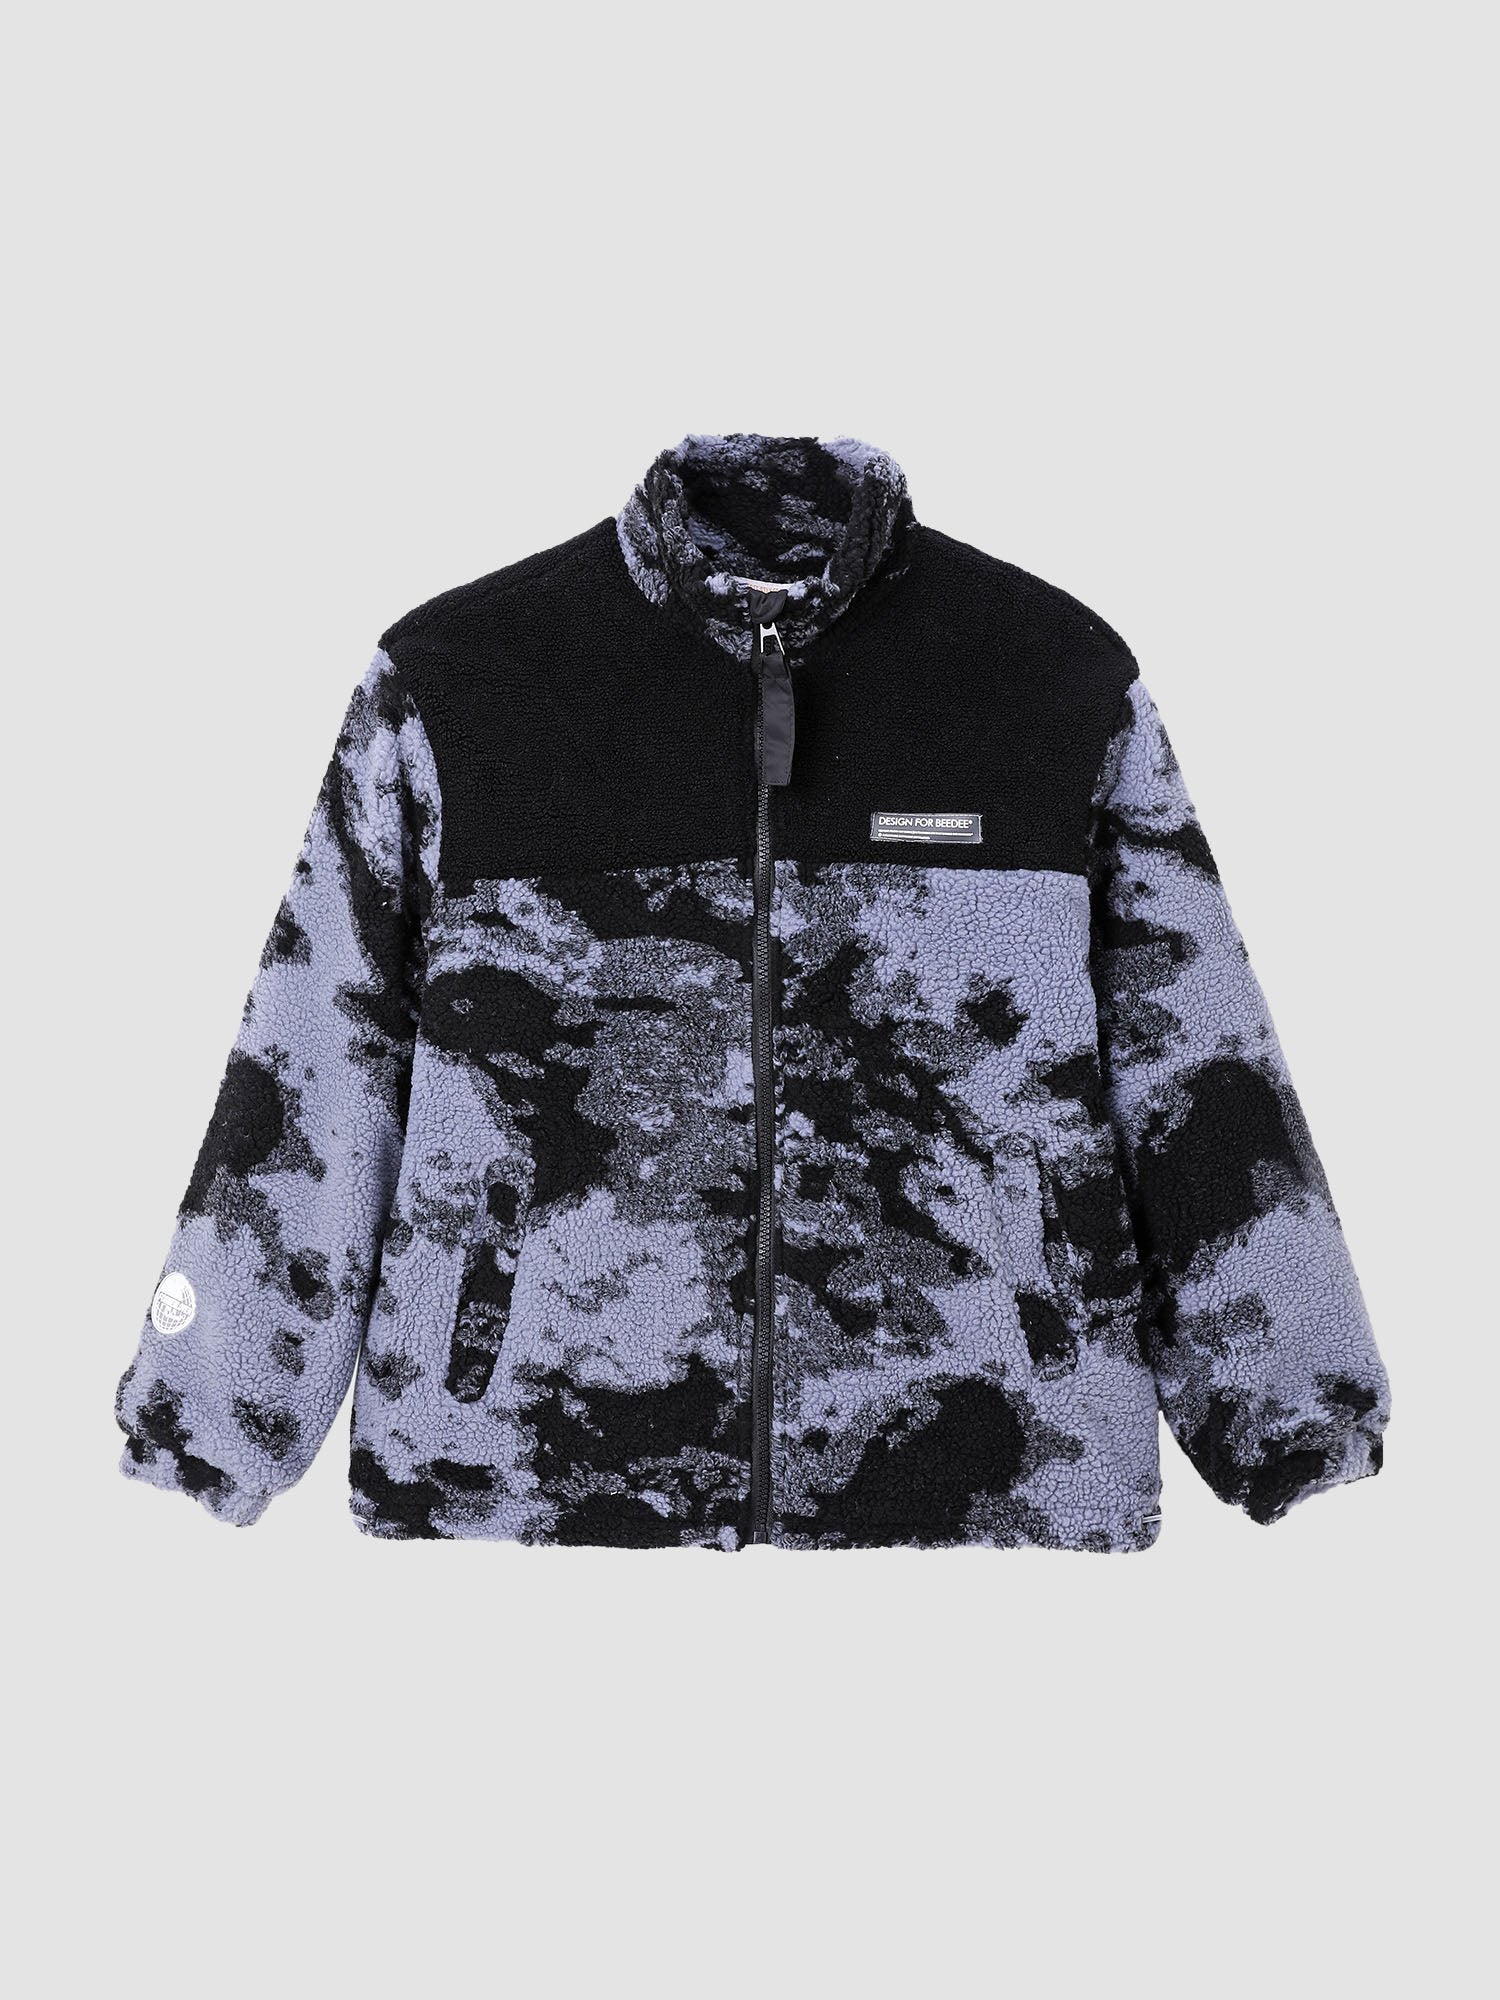 JUSTNOTAG Letter Embroidered Camouflage Polar Fleece Coat